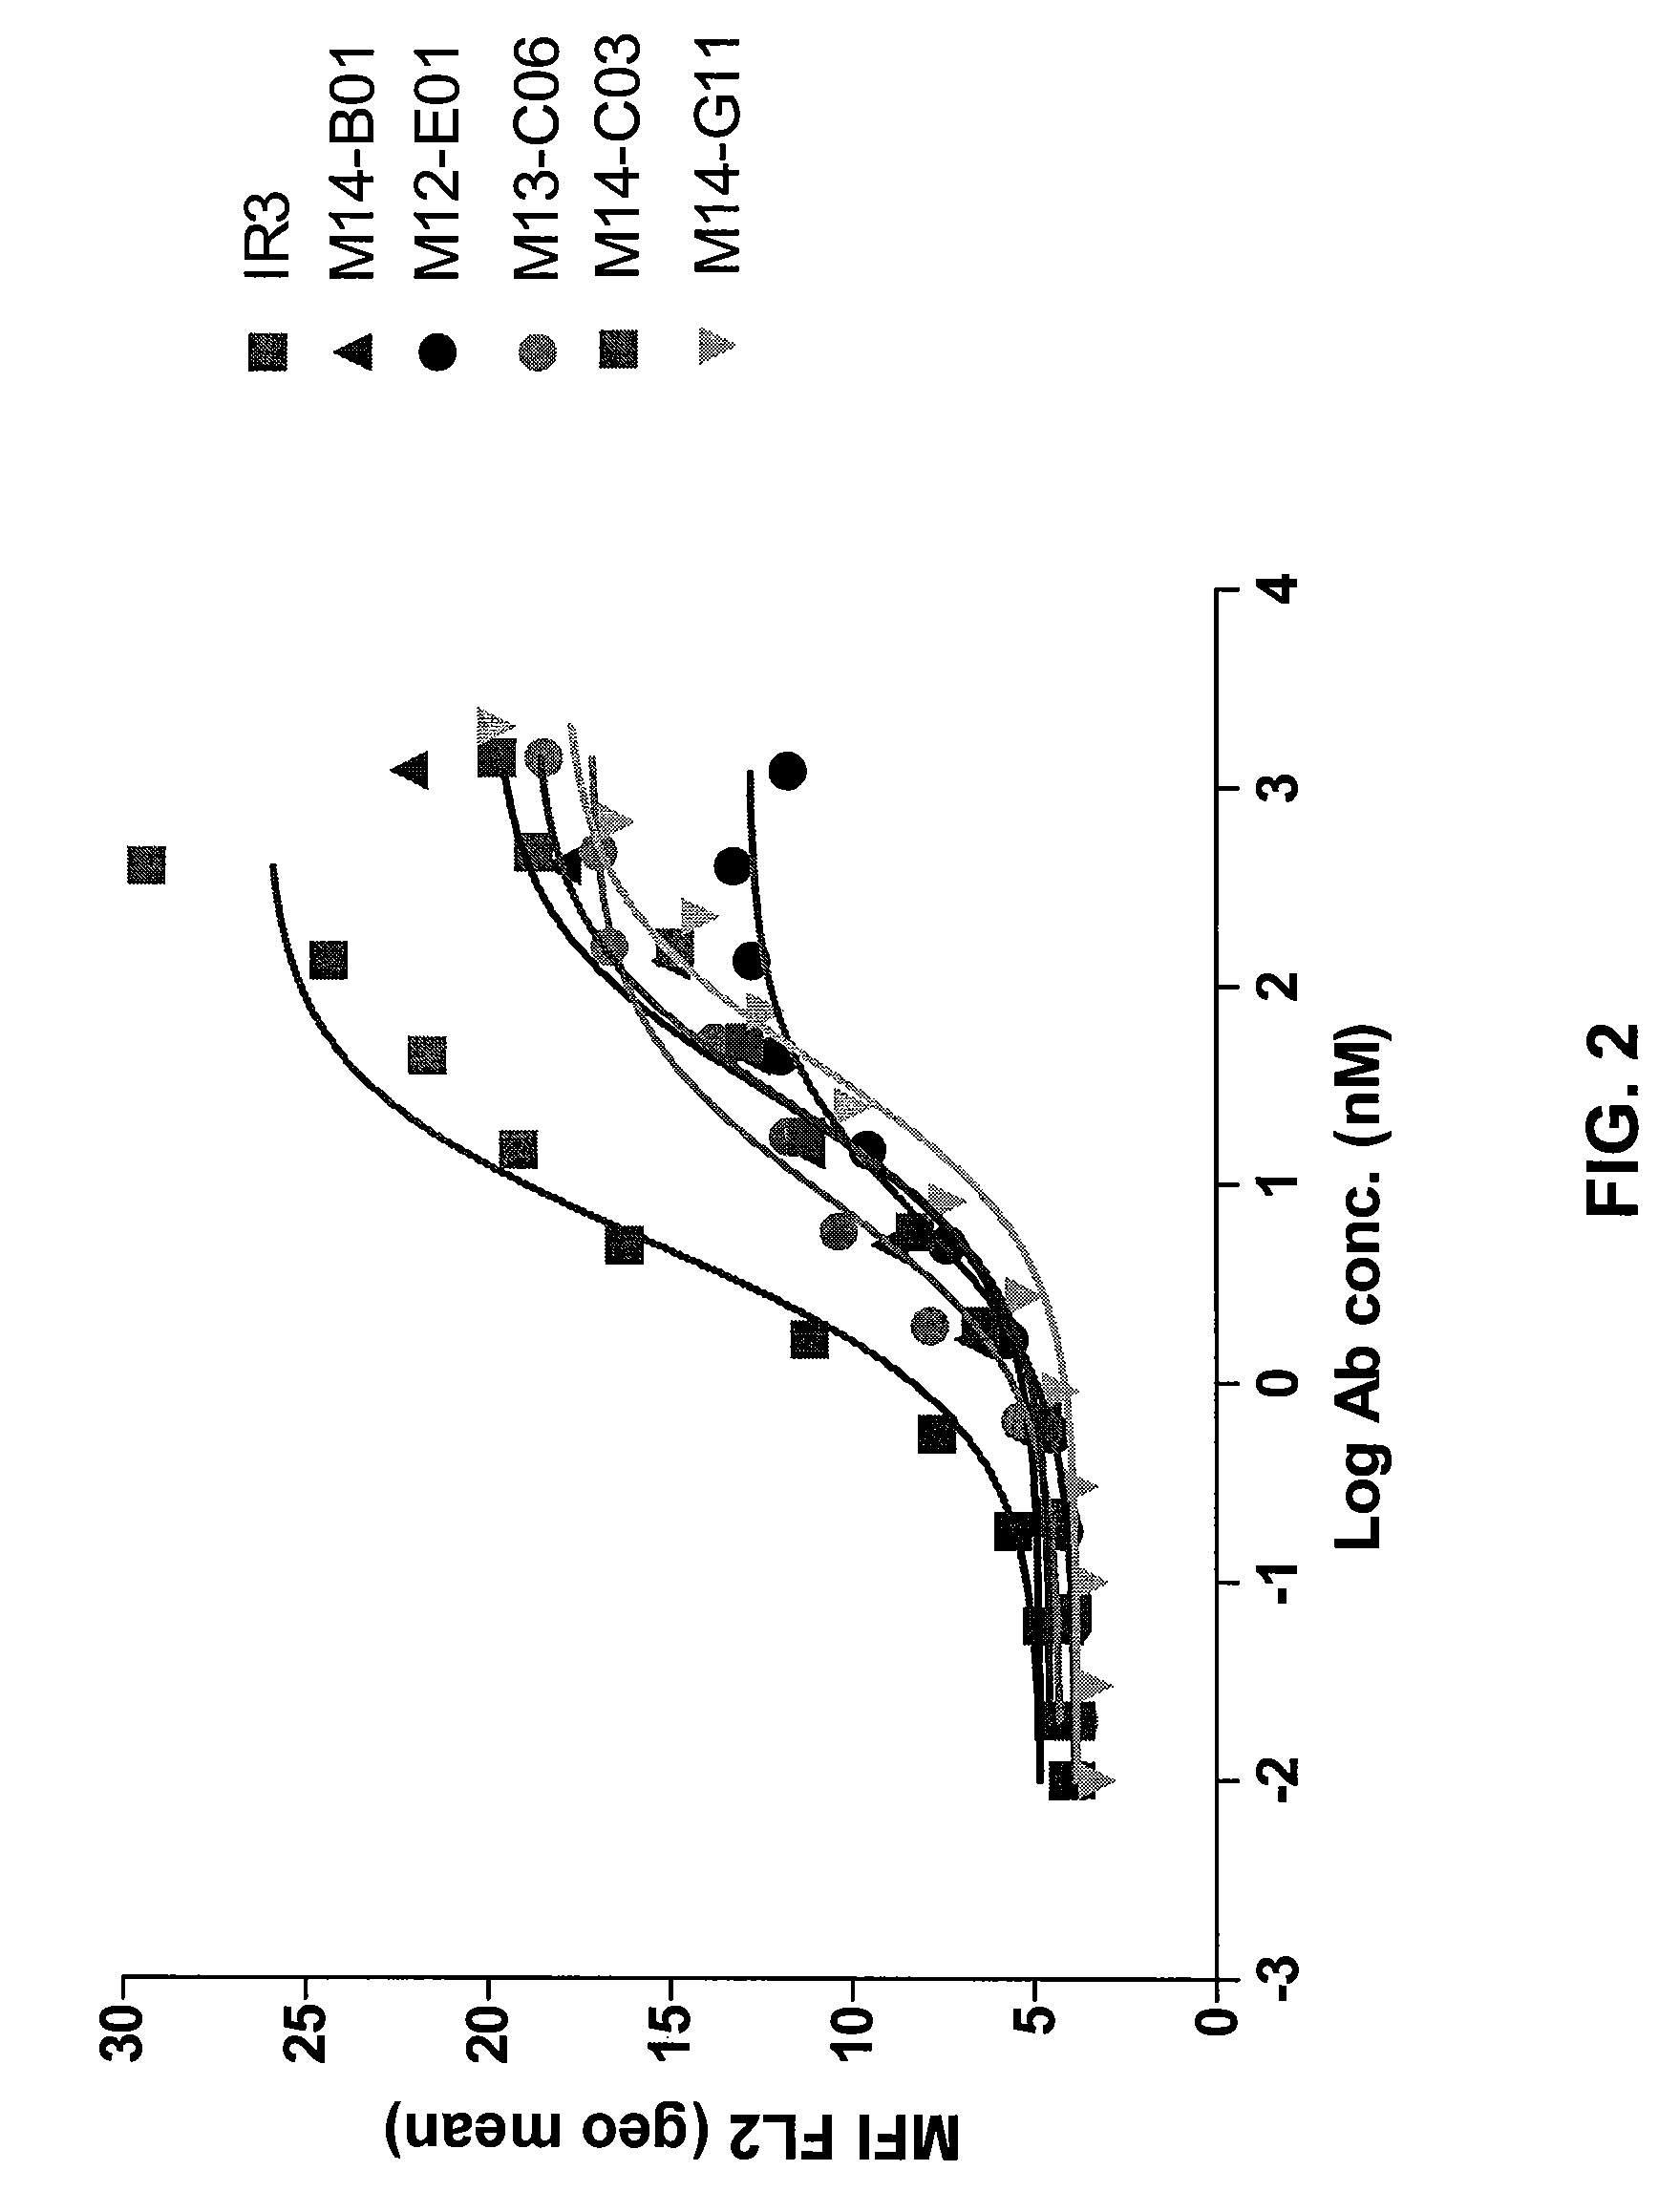 Therapeutic combinations of Anti-igf-1r antibodies and other compounds